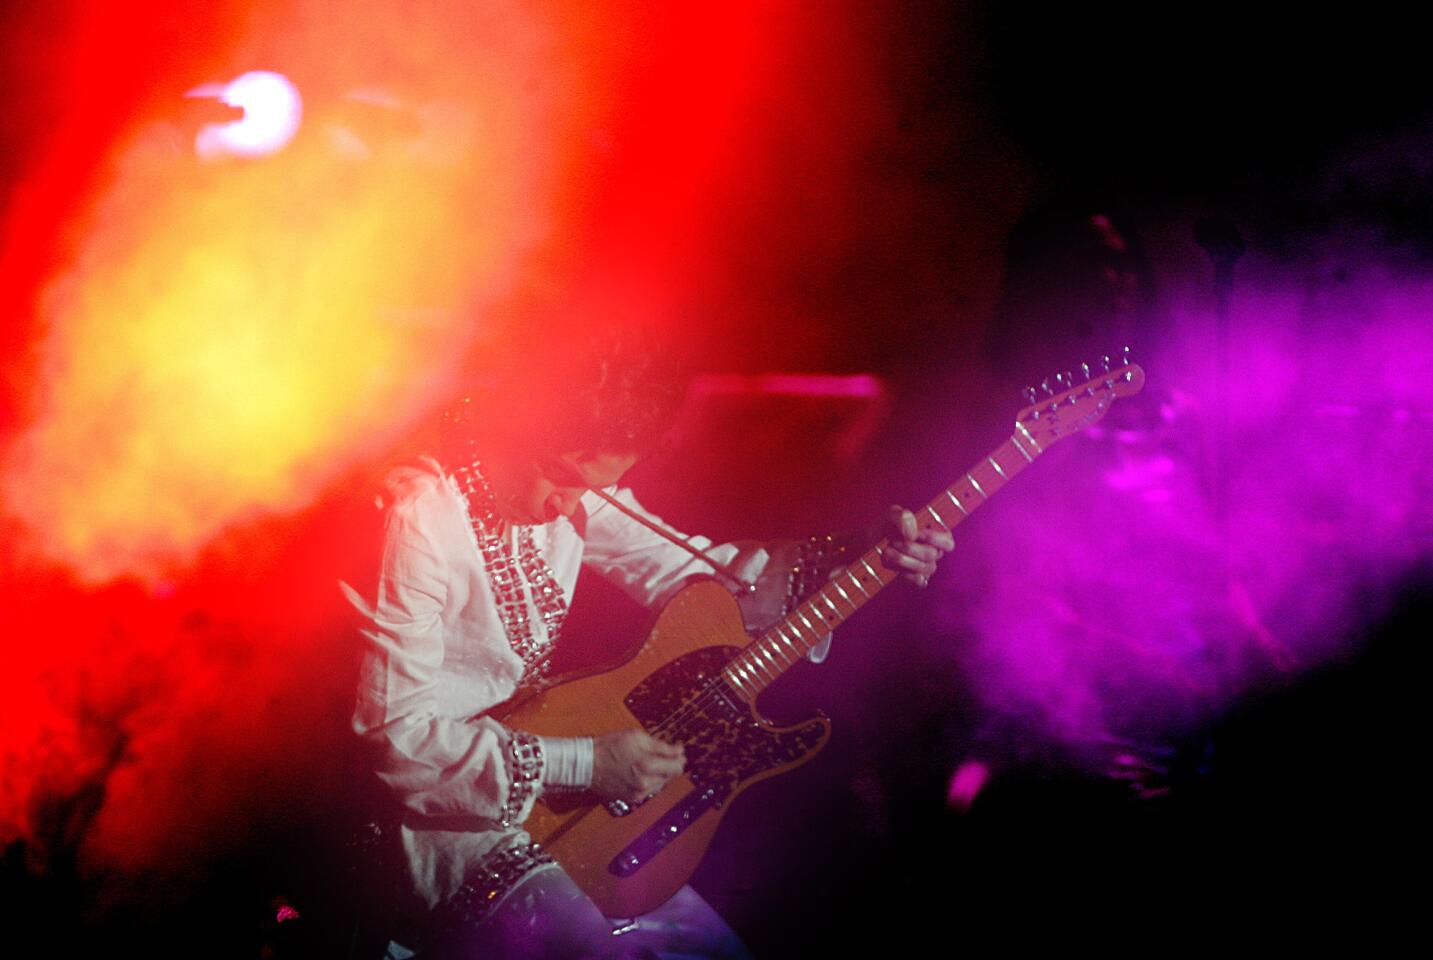 Prince performs at Coachella Valley Music & Arts Festival in 2008.